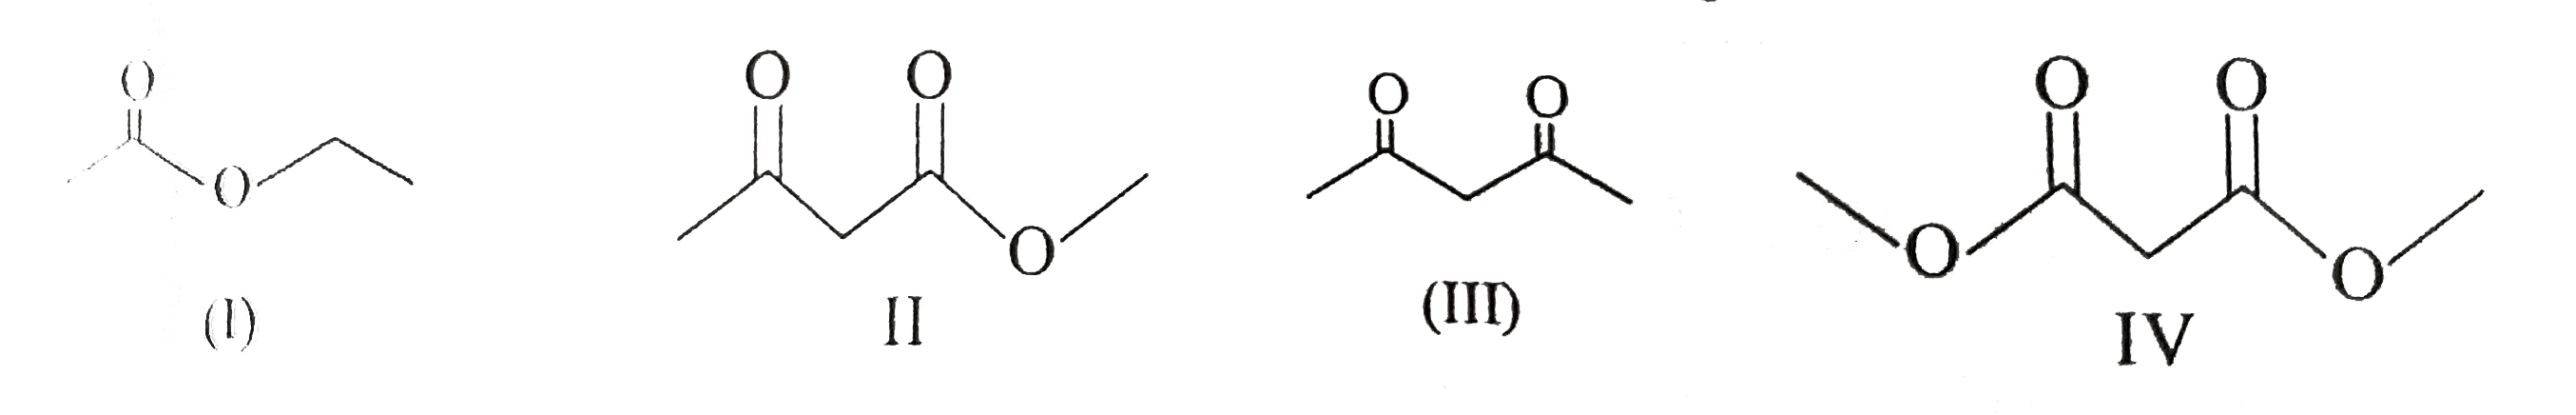 In each of the followings sets of compounds write the decreasing order of % enol content.